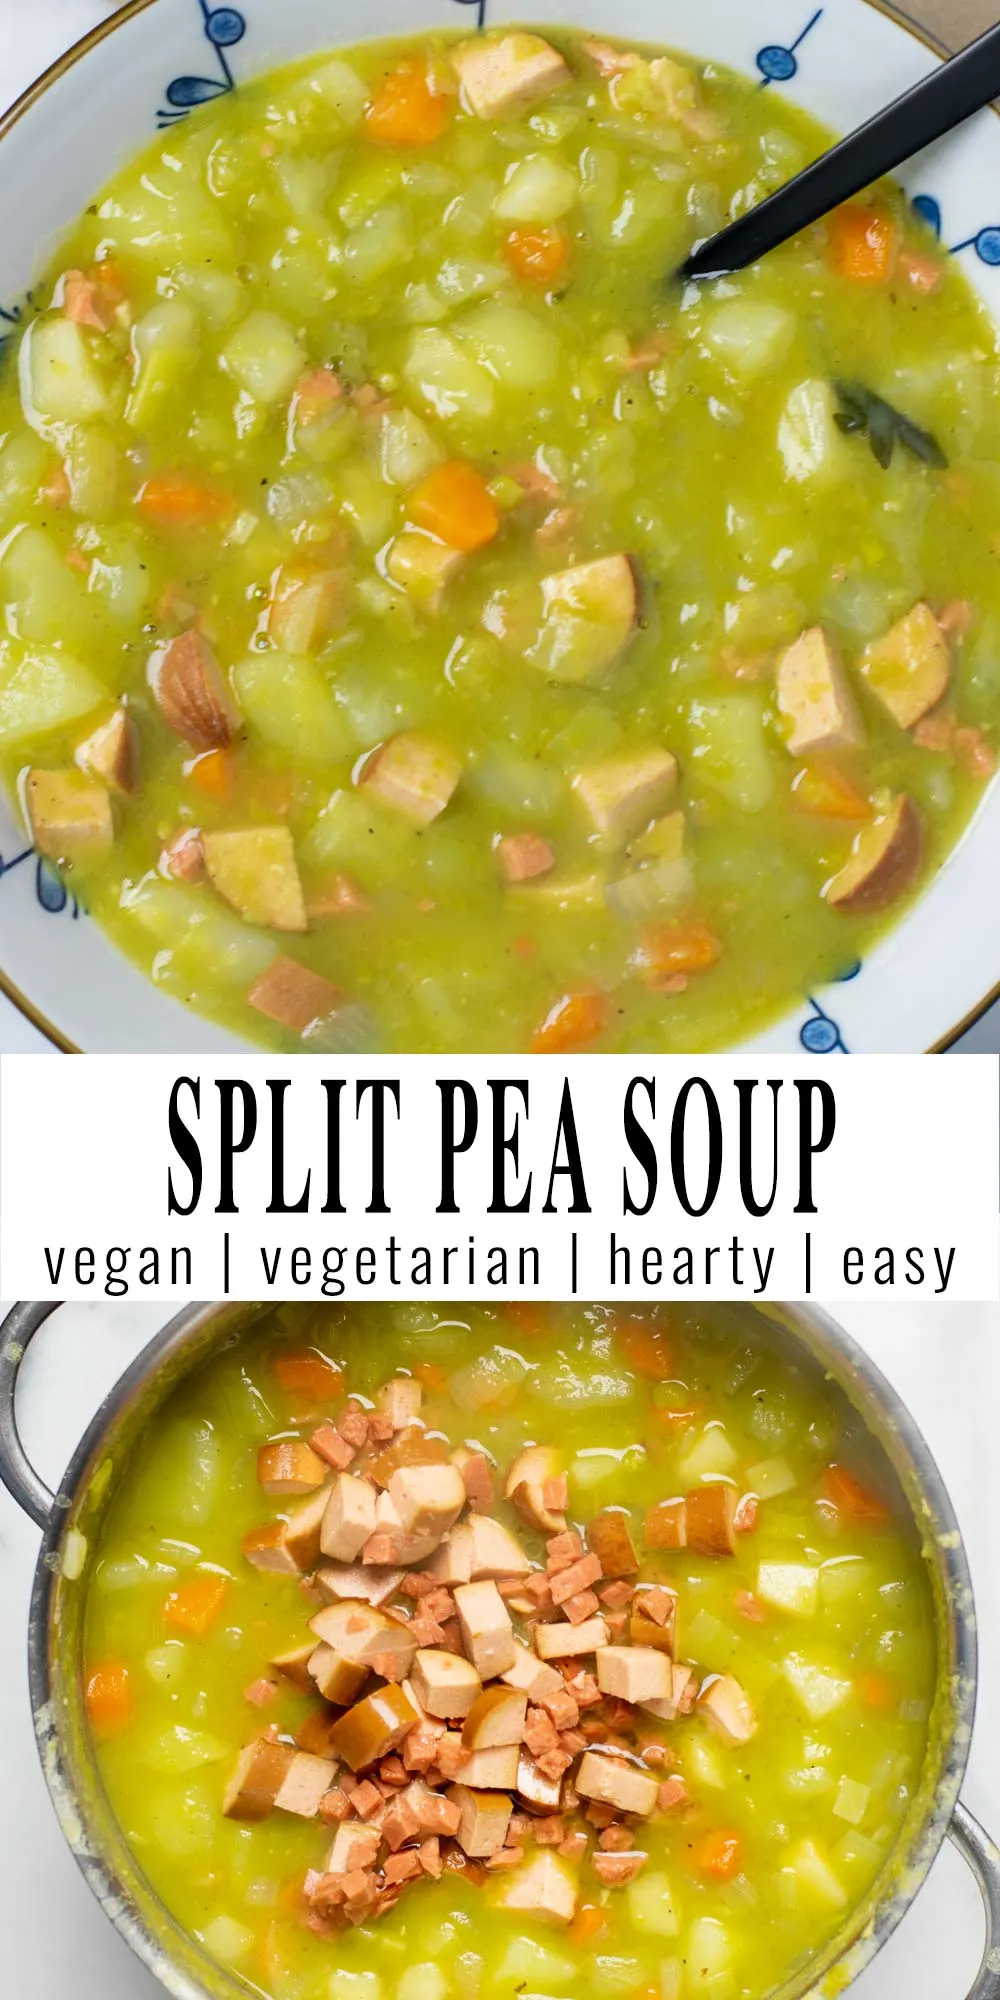 Collage of two pictures of the Split Pea Soup with recipe title text.